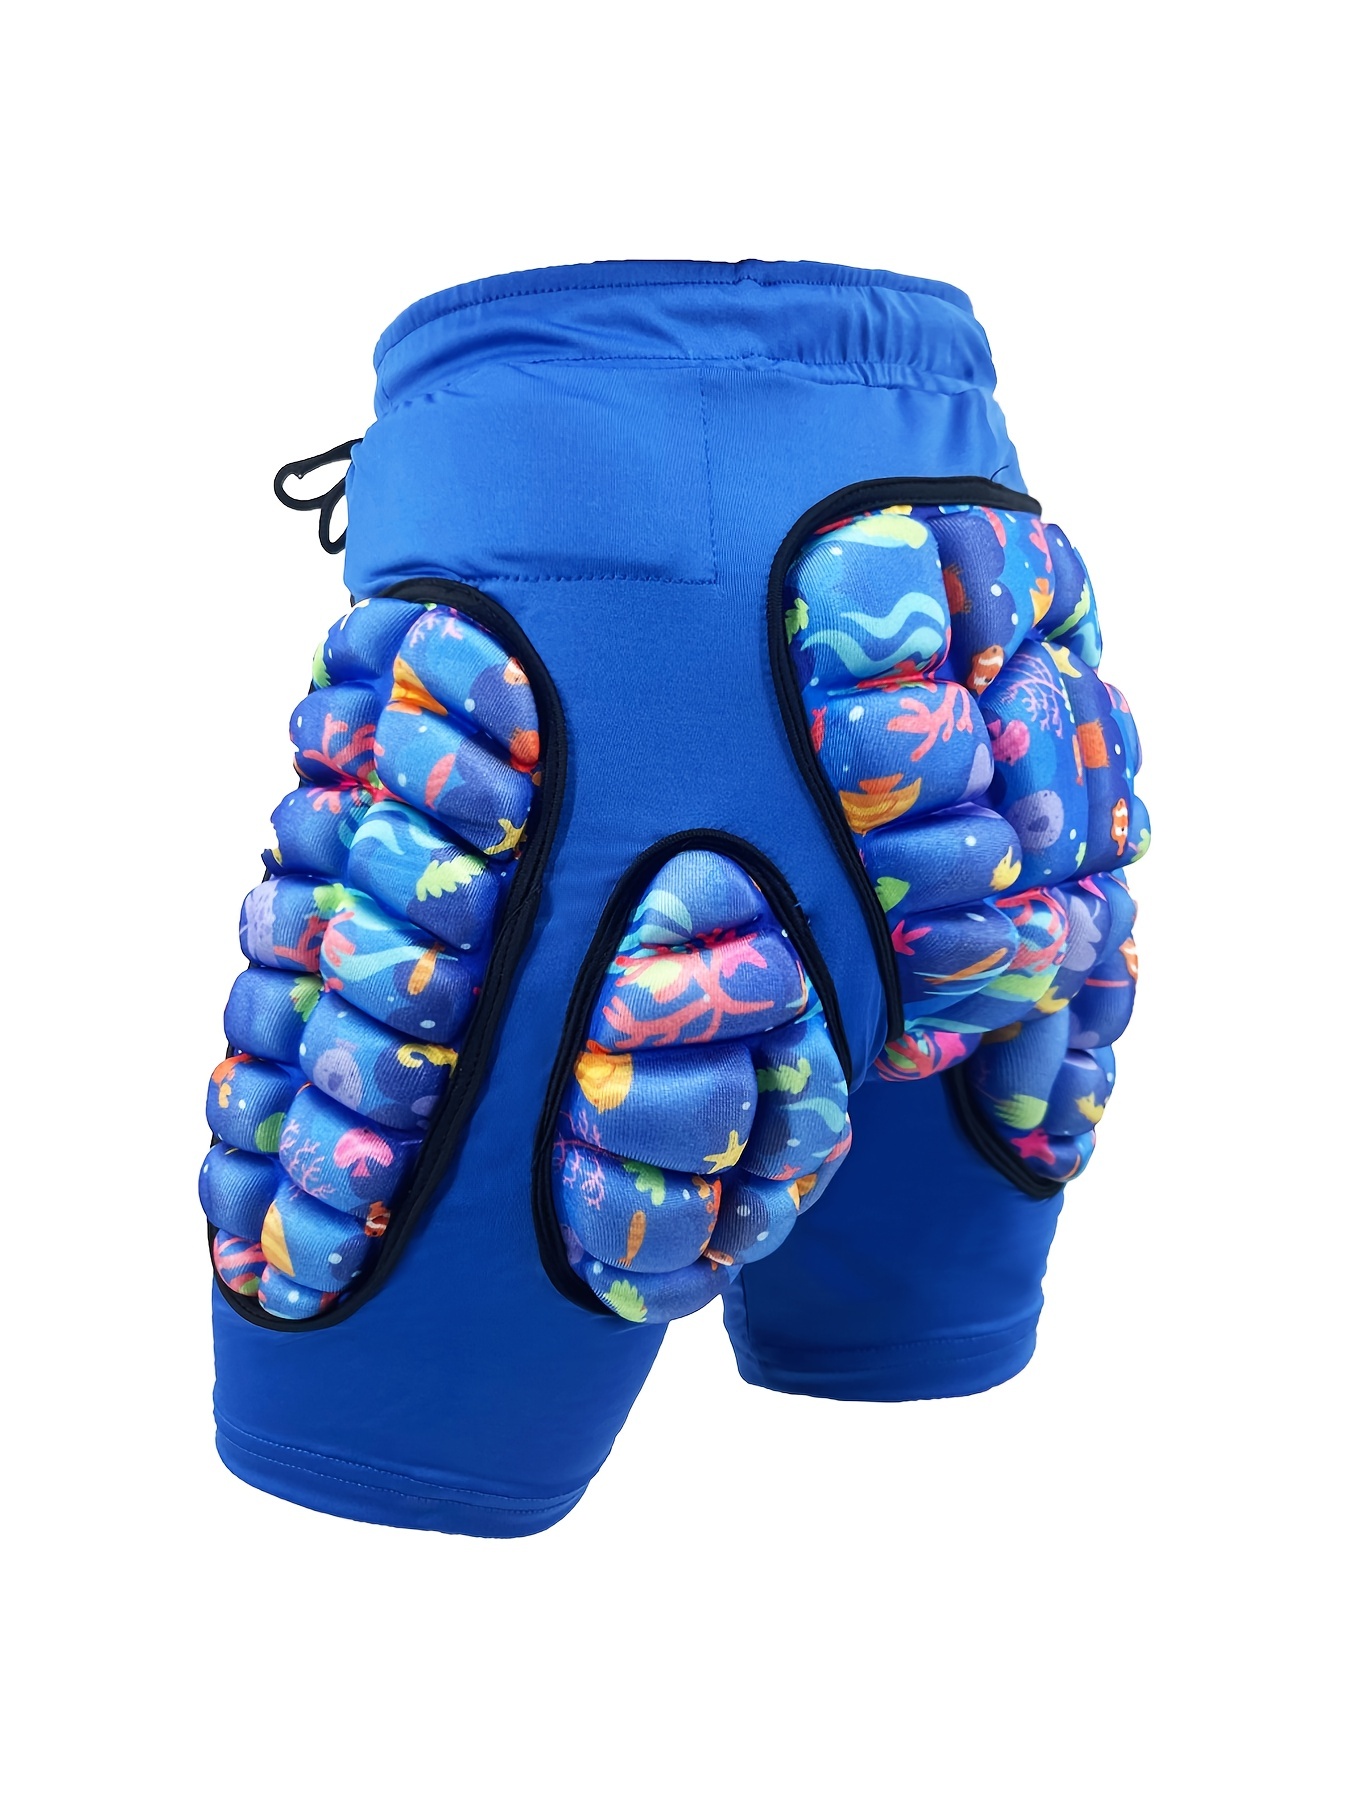 Skating Padded Shorts Protective Hip Butt and Tailbone, Snowboard  Protective Gear Adult Armor Impact Shorts